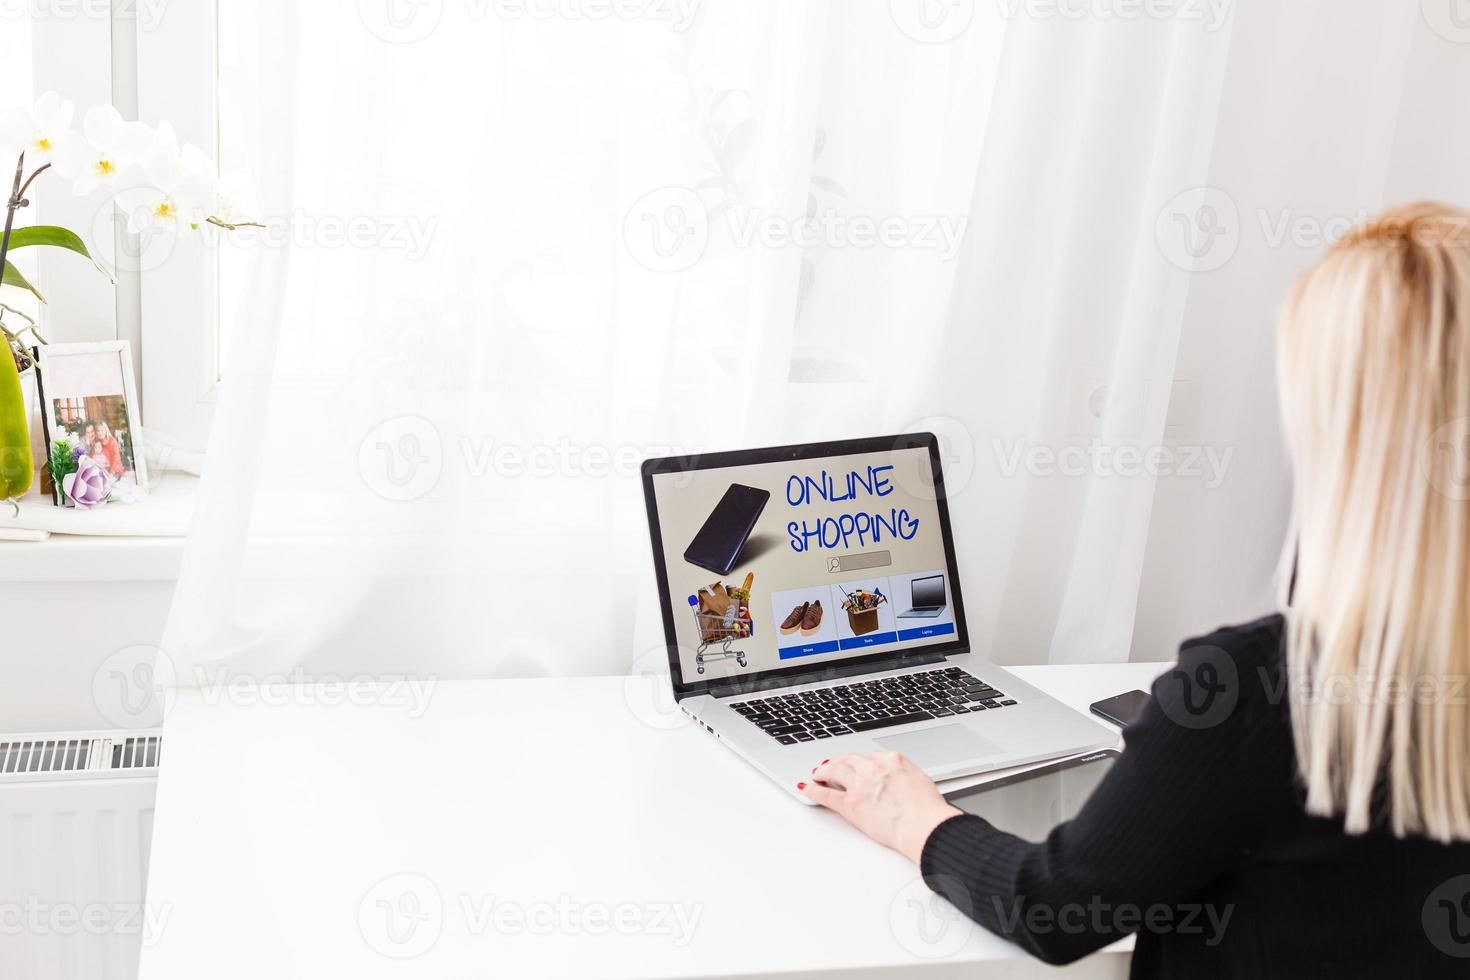 Woman shopping online using her laptop at home photo